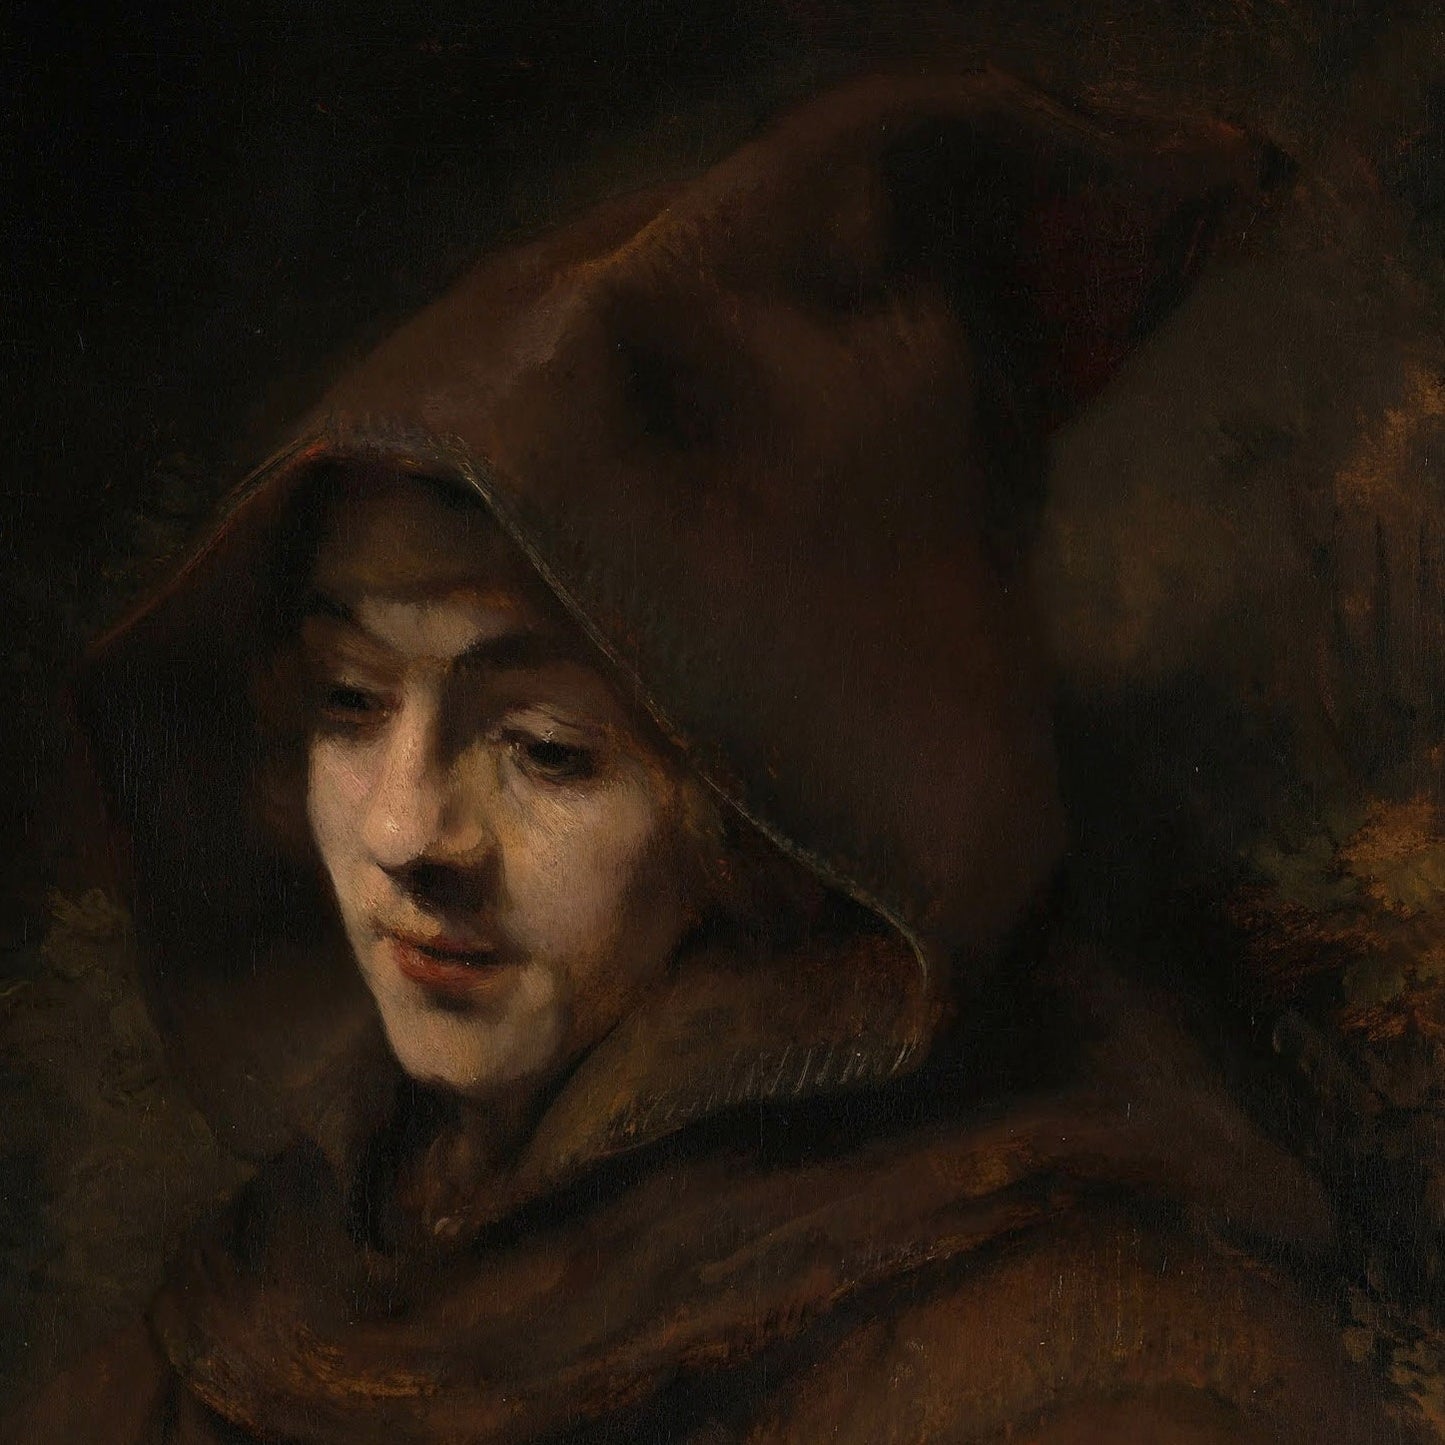 Rembrandt's Son Titus in a Monk's Habit by Rembrandt, 3d Printed with texture and brush strokes looks like original oil-painting, code:235